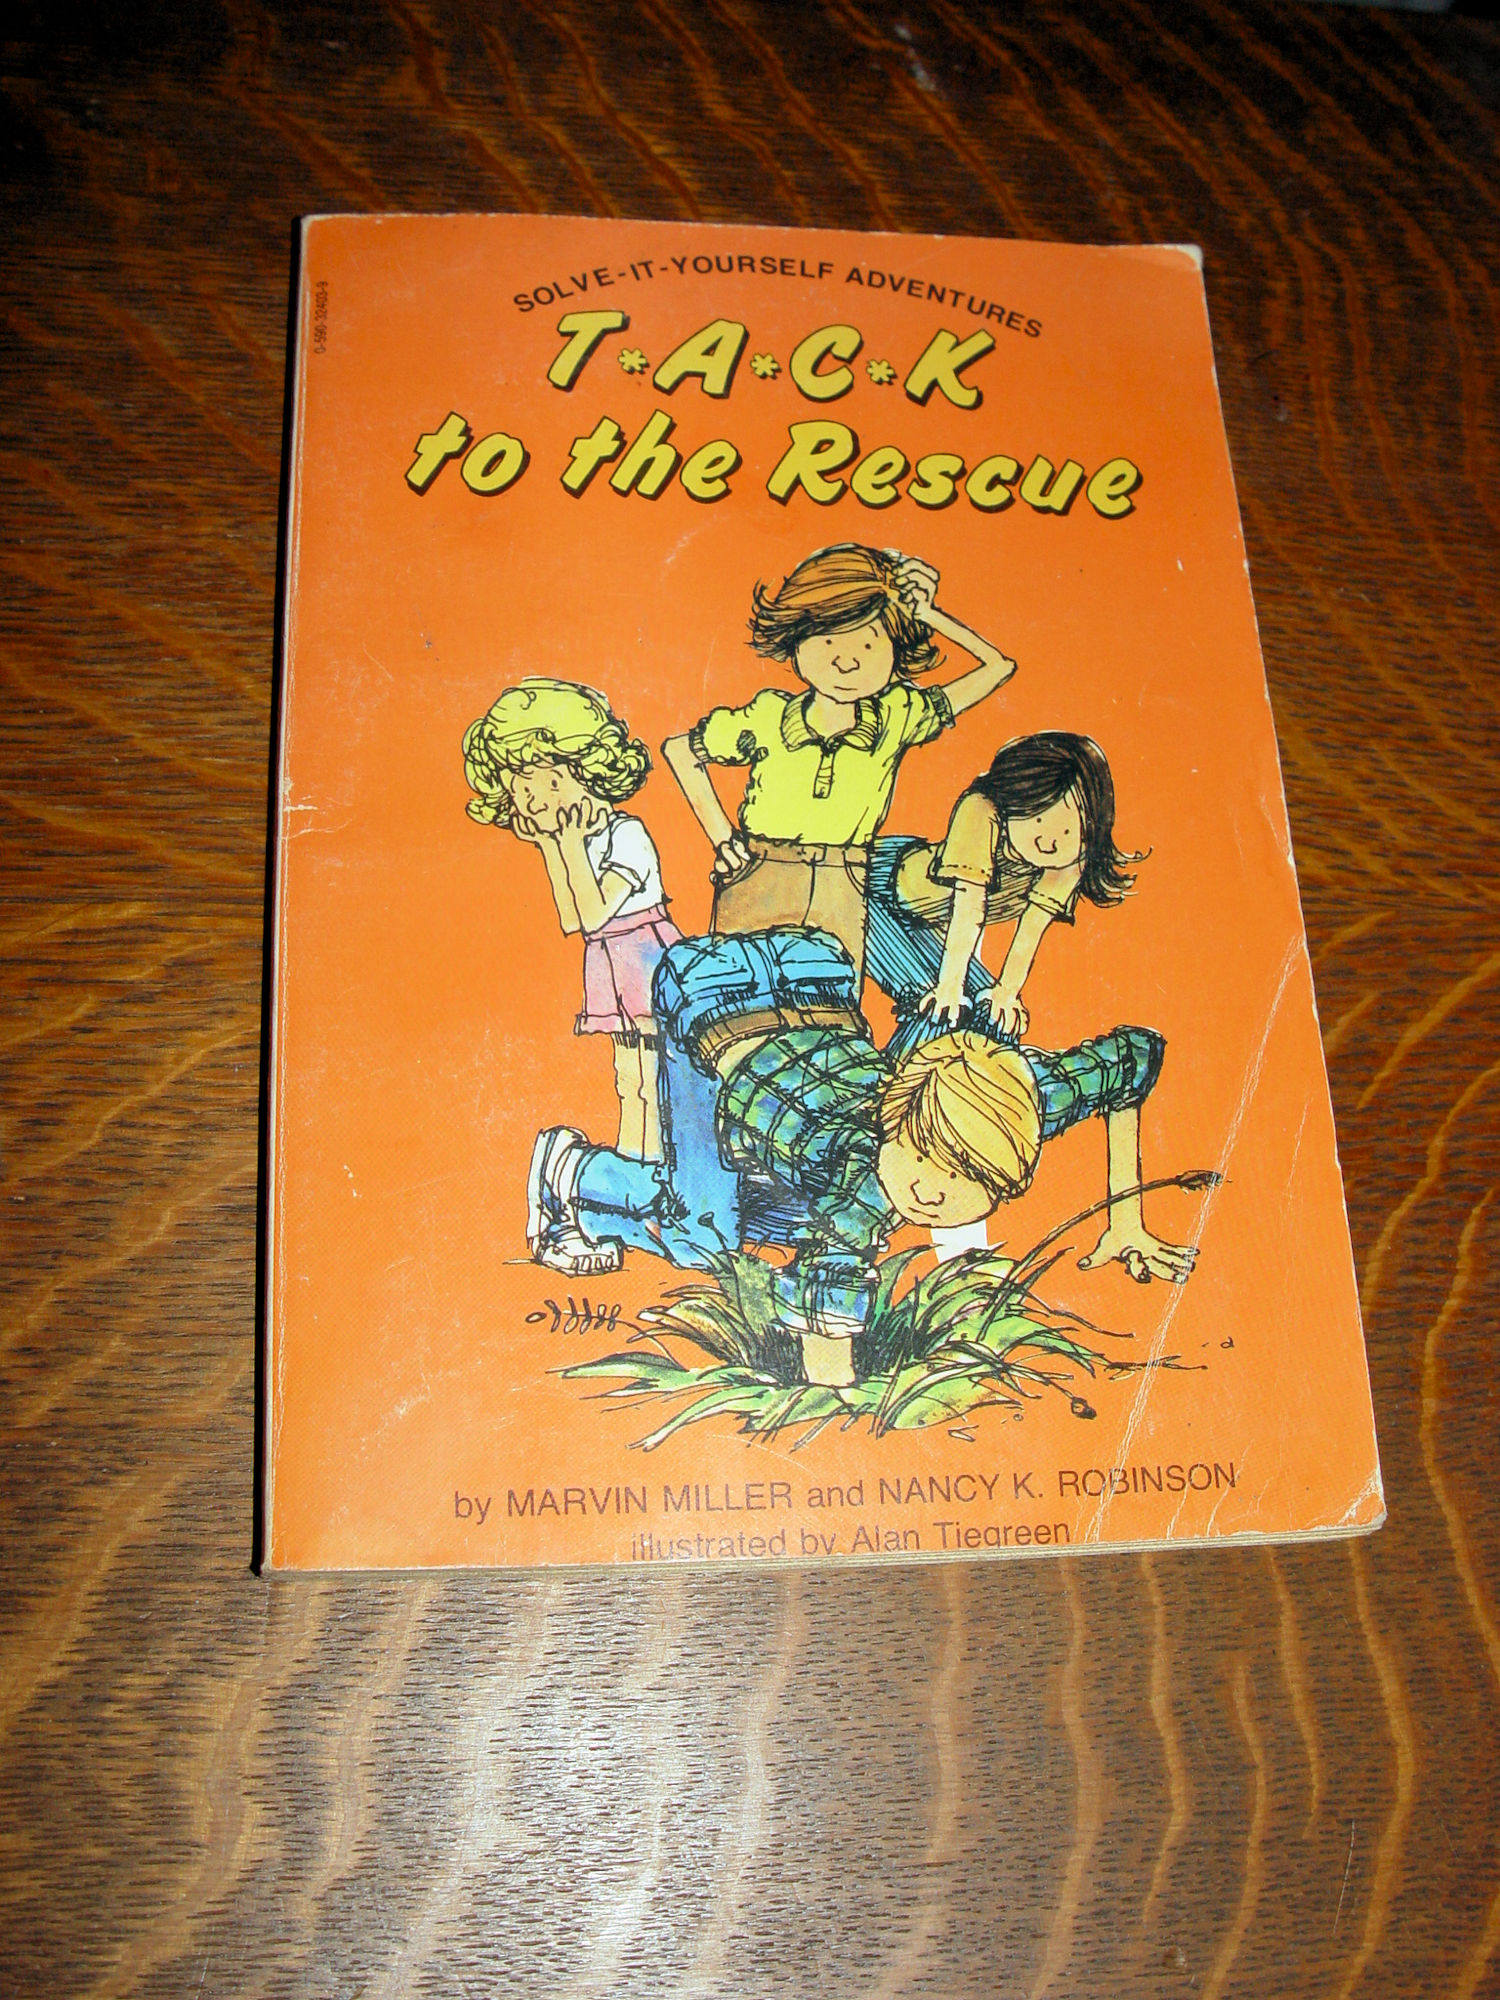 T*A*C*K to the Rescue 1982 by Marvin Miller
                        and Nancy K. Robinson